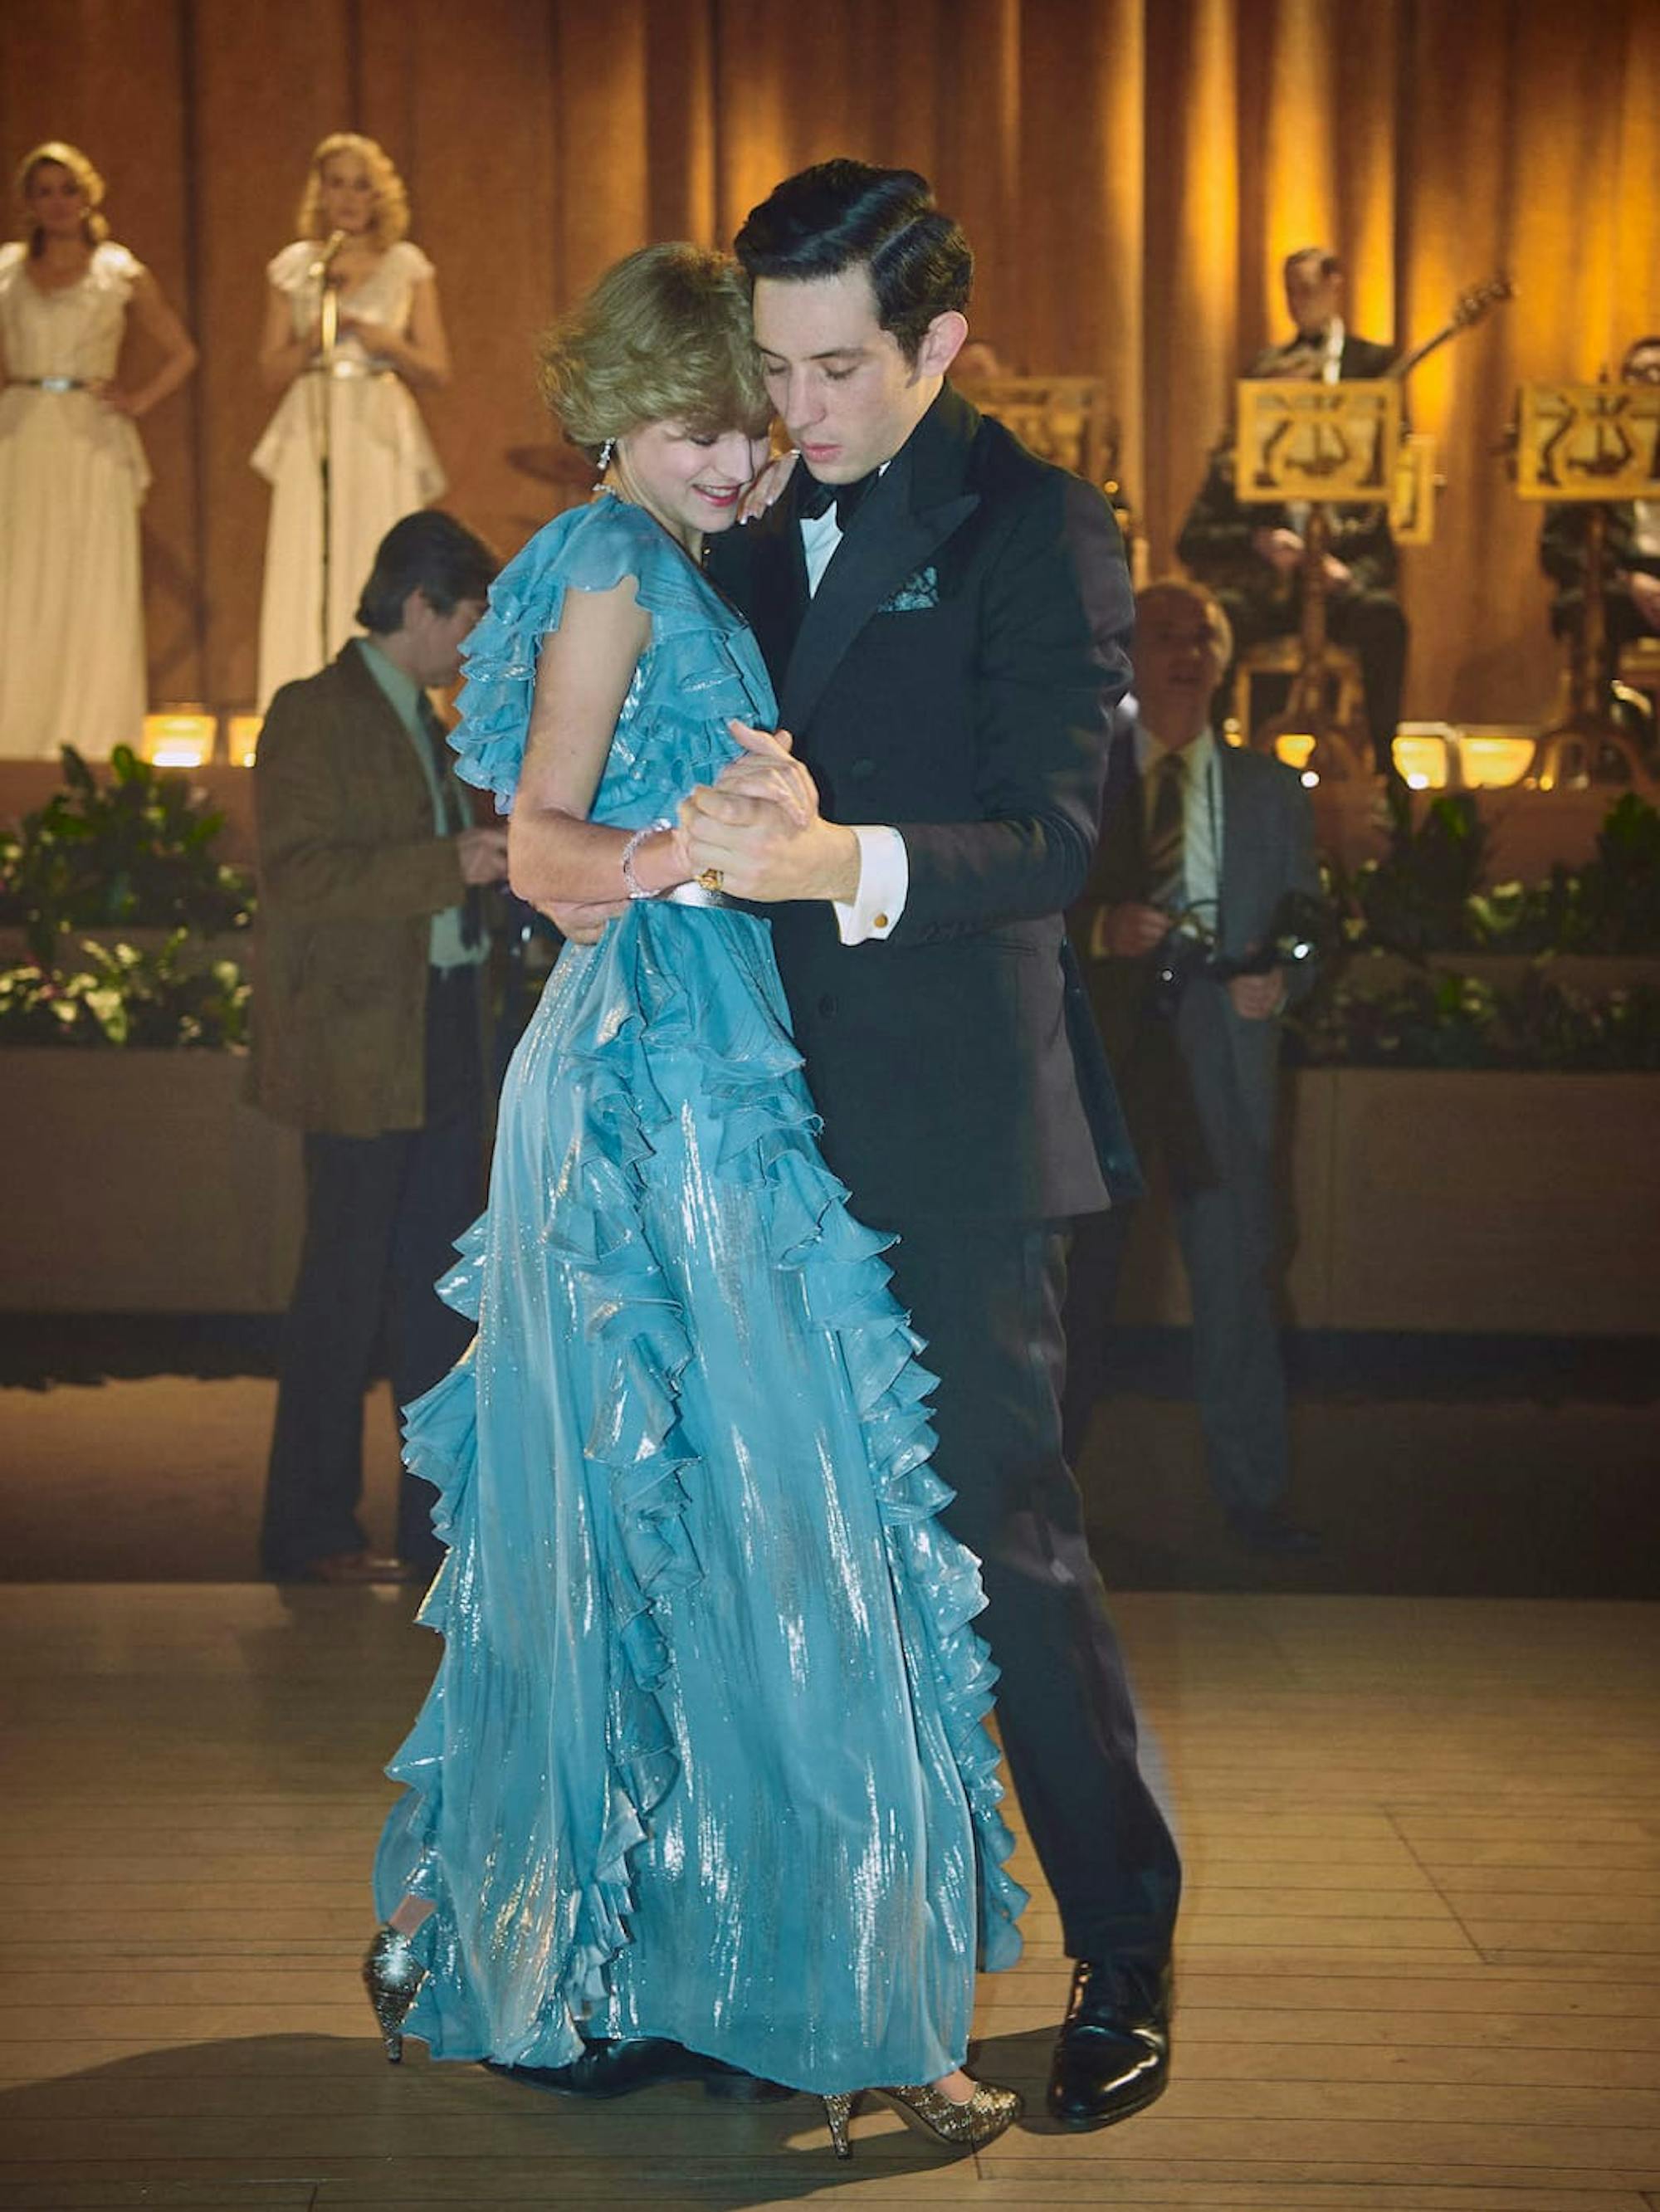 Princess Diana (Emma Corrin) and Prince Charles (Josh O’Connor) dance close together. Diana rocks a stunning, turquoise, fluttery dress and Charles wears a suit. In the background is a band and chorus.